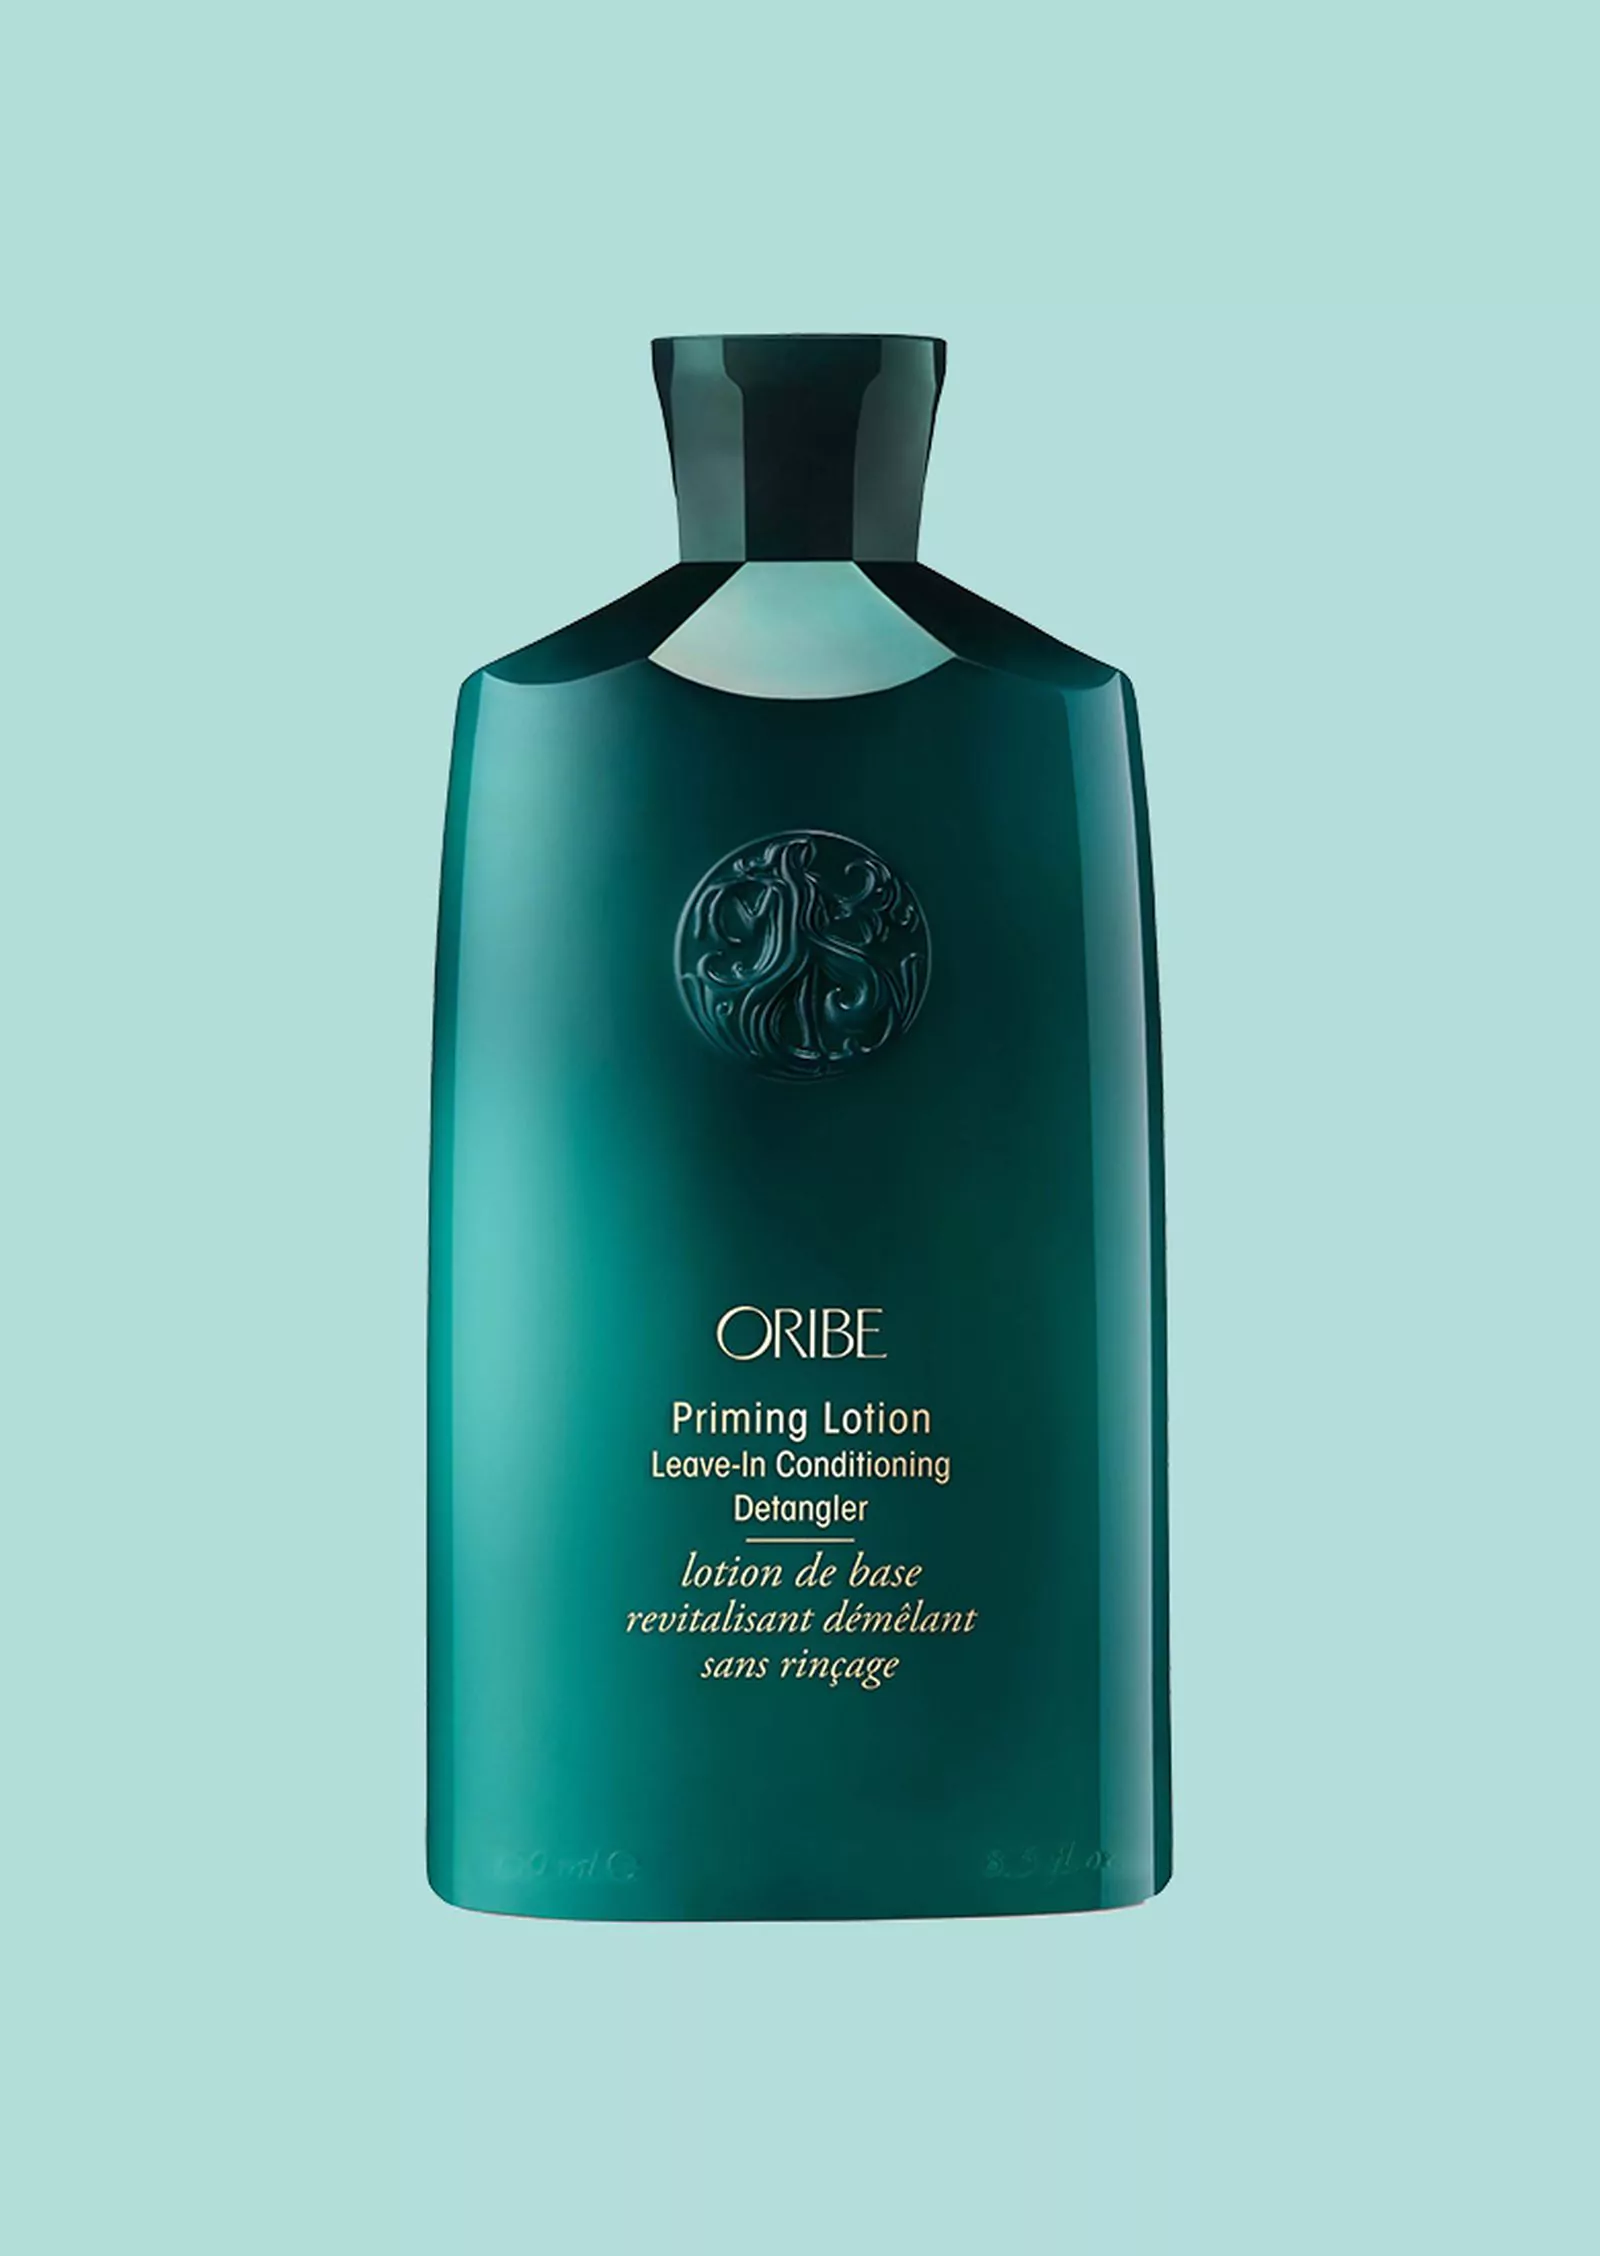 Oribe Priming Lotion Leave-In Conditioning Detangle